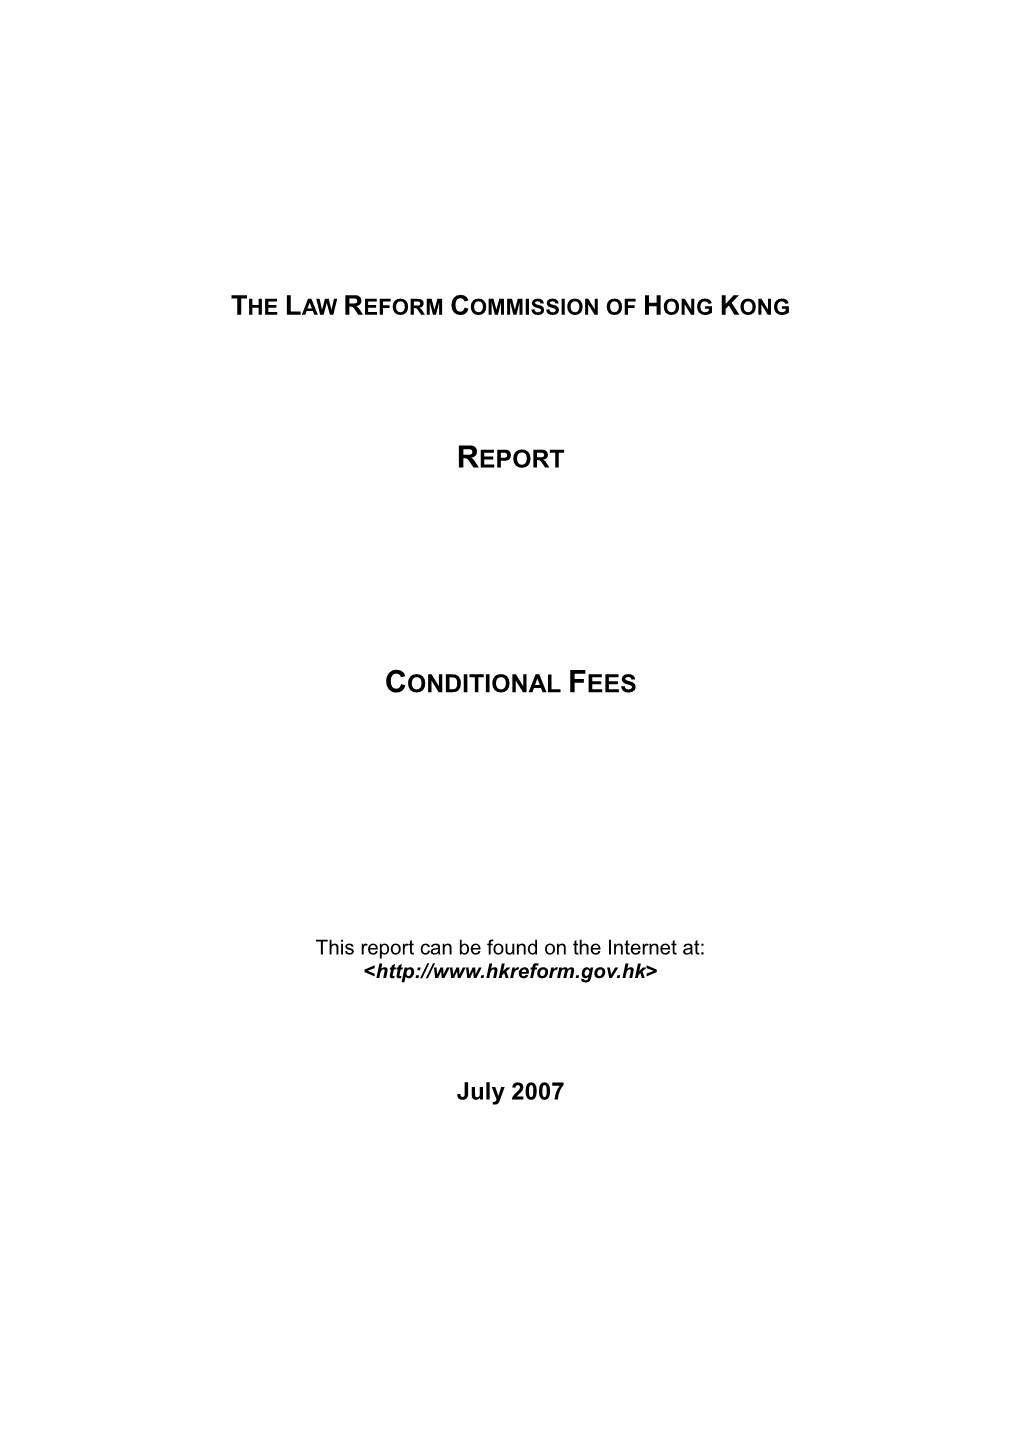 Conditional Fees